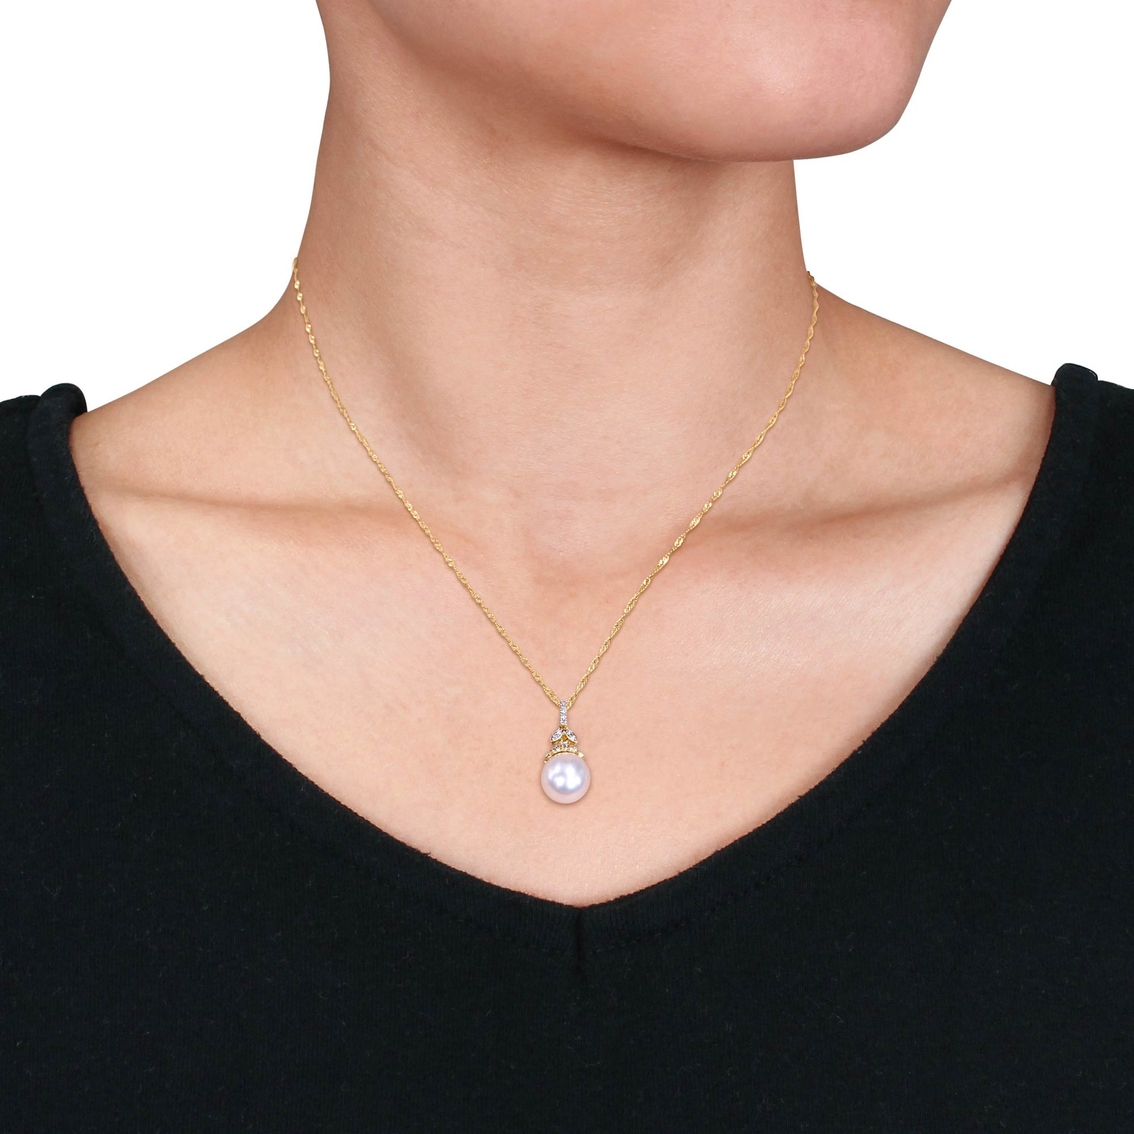 Michiko 14K Gold South Sea Cultured Pearl and 1/10 CTW Diamond Drop Necklace - Image 2 of 2